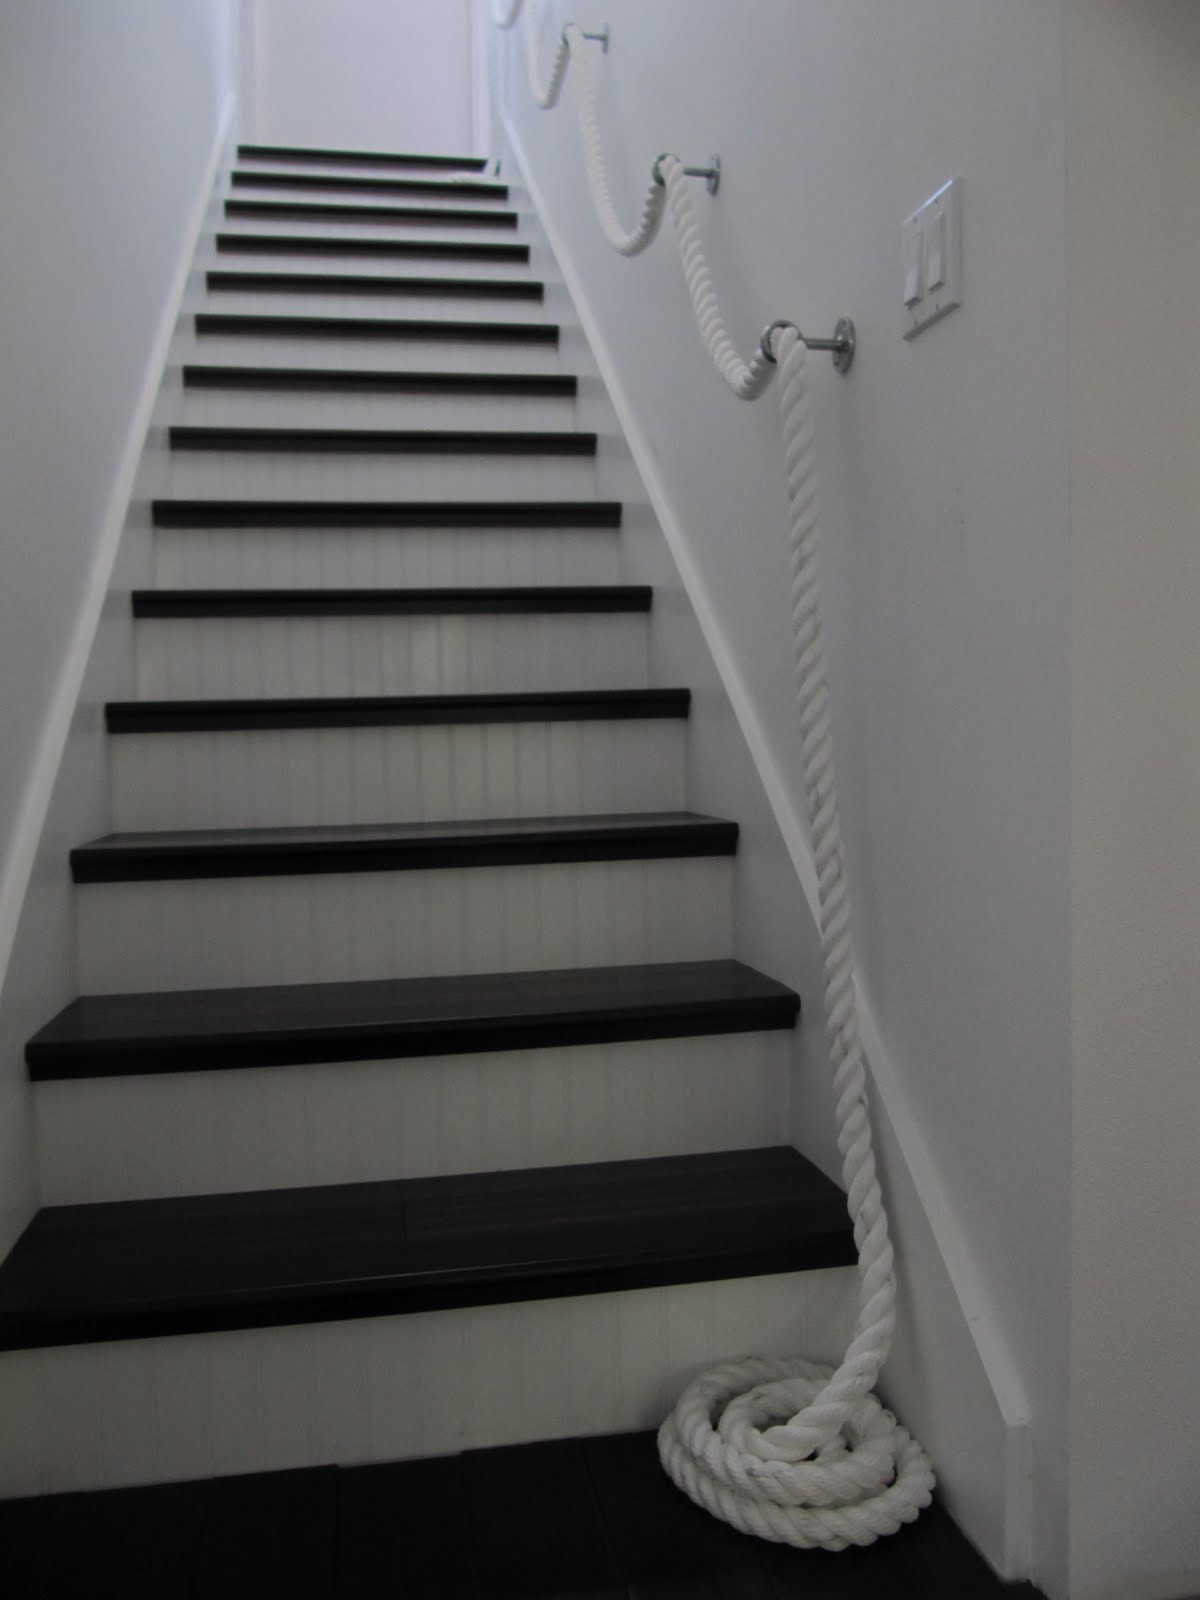 laurie's-projects: Stair Rope Banister